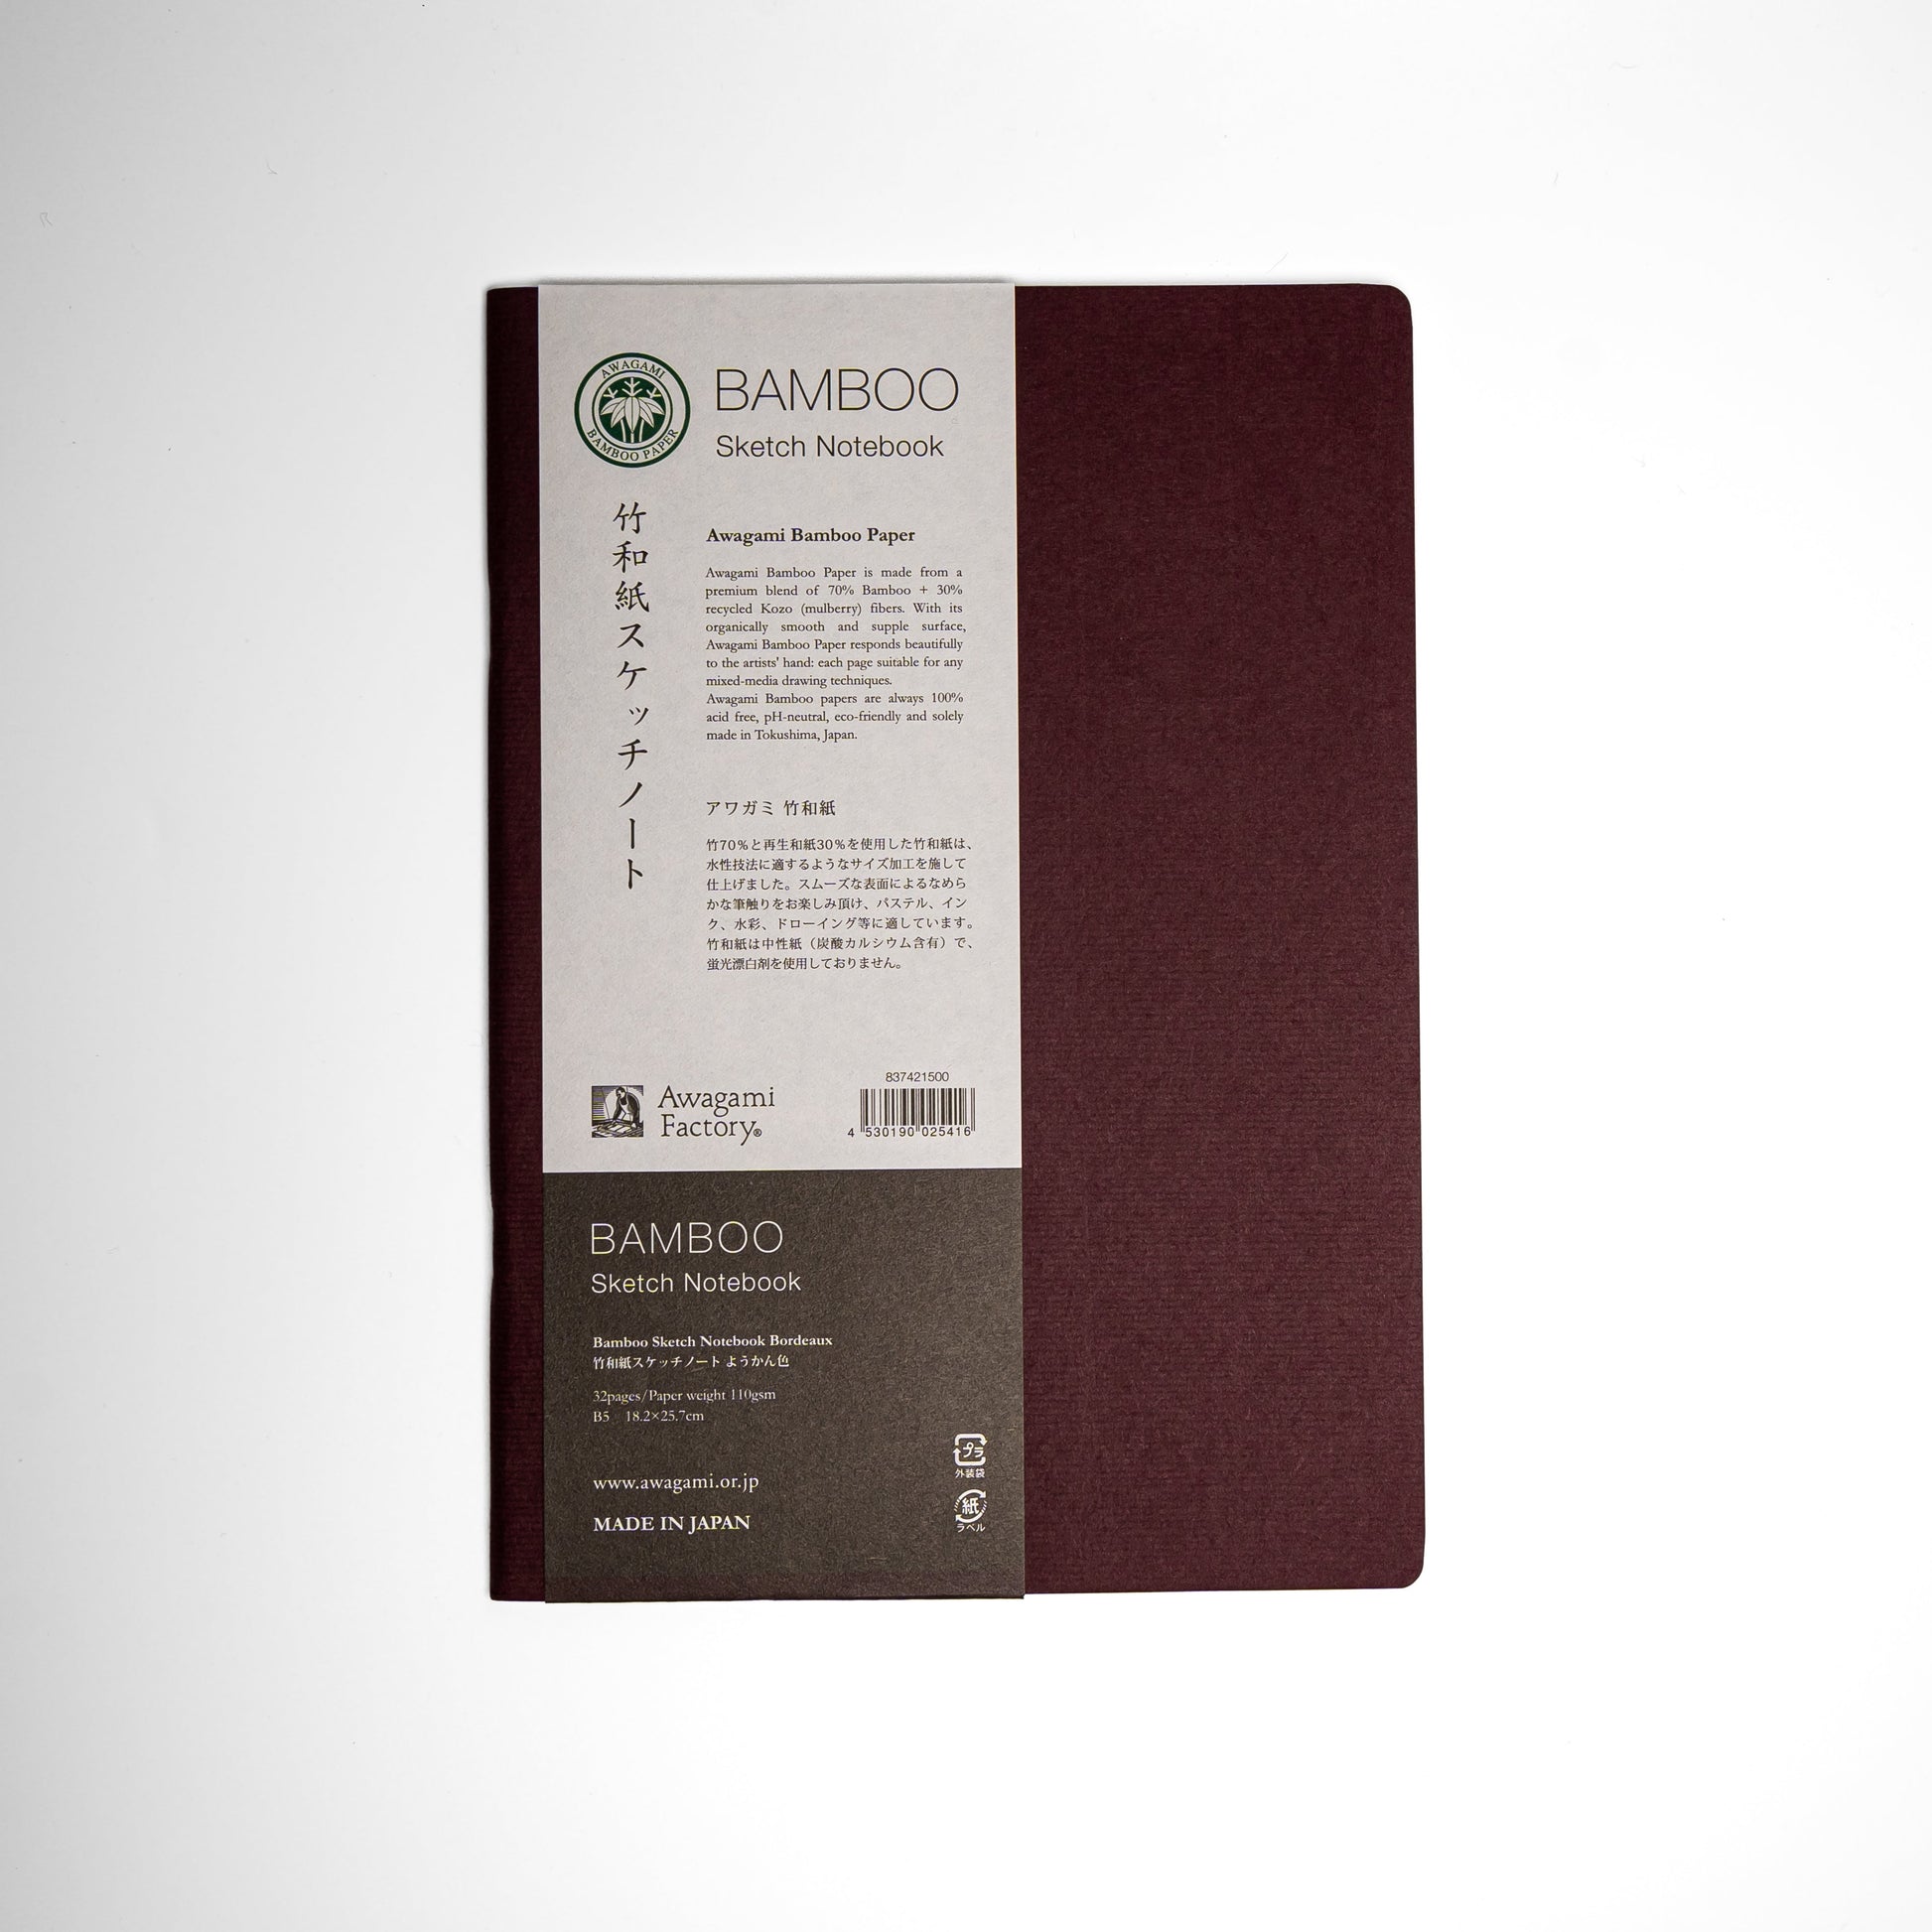 A Bordeaux red Awagami Factory bamboo washi paper sketchbook on a white background